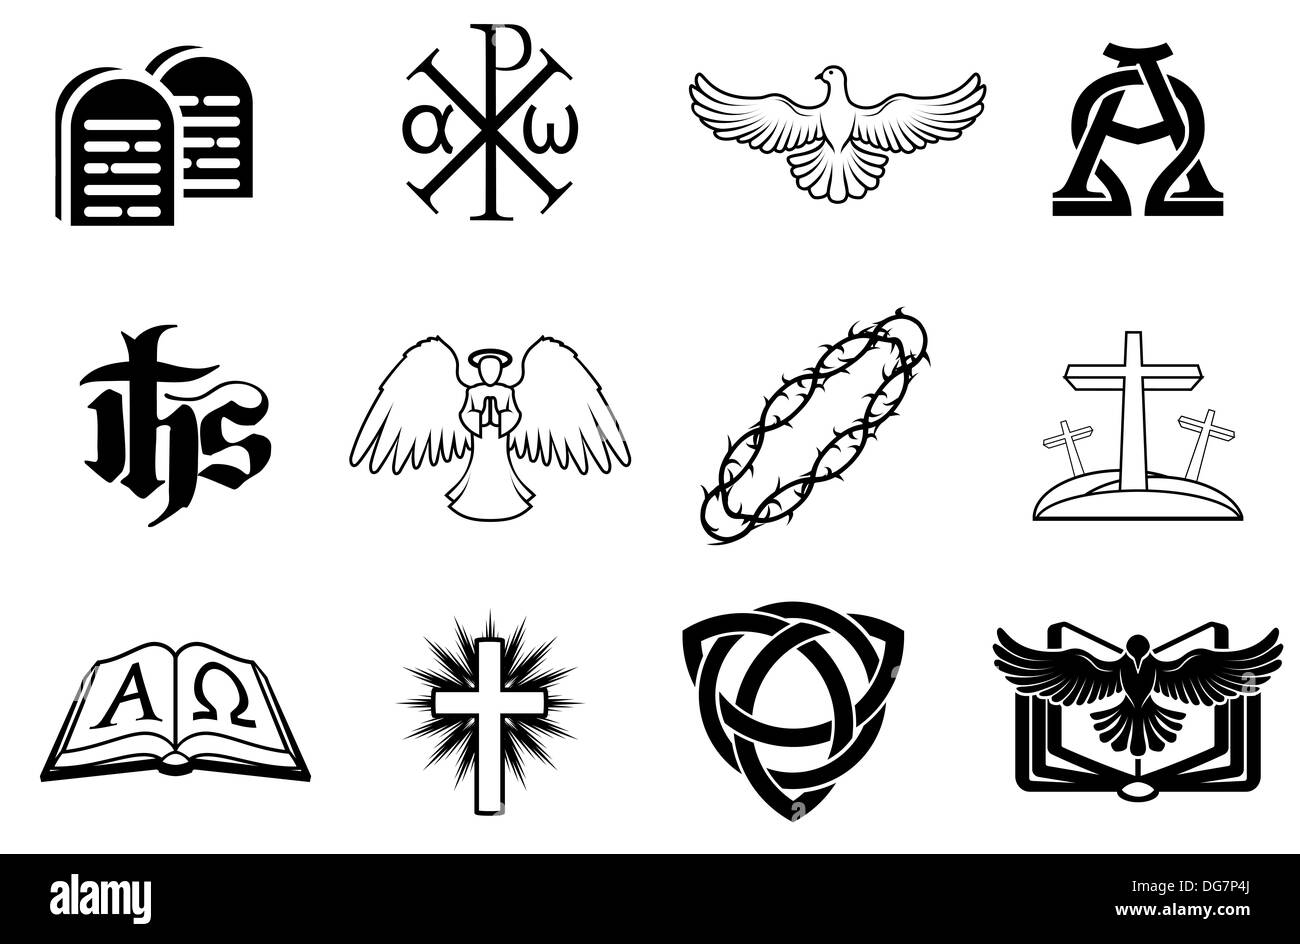 A set of Christian icons including angel, dove, alpha omega, Chi Ro and many more Stock Photo